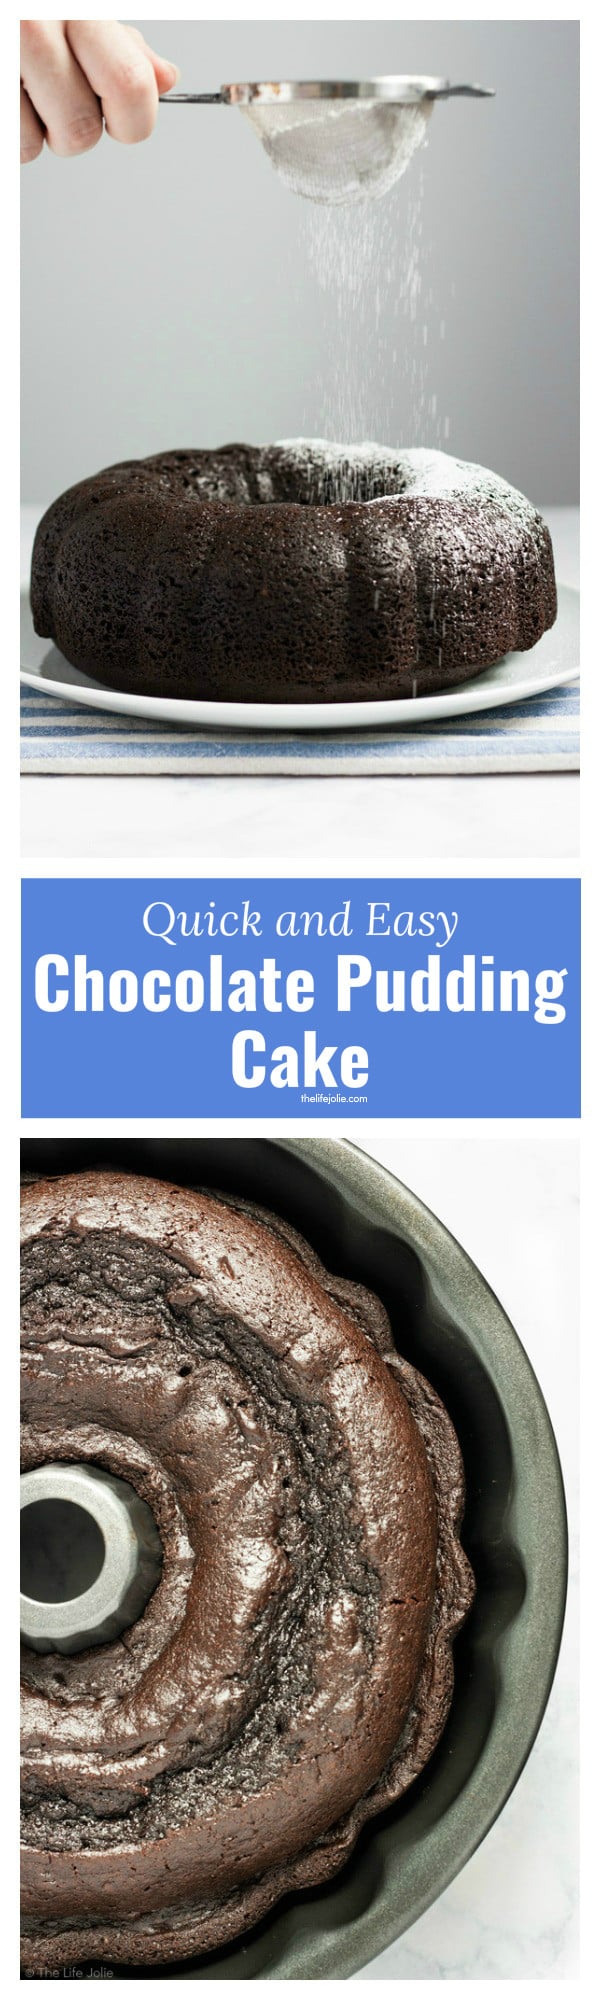 This quick and easy Chocolate Pudding Cake recipe is a delicious cake mix hack! There are only five simple ingredients and the result is the most perfectly moist cake you'll ever taste. This is an awesome last-minute dessert to throw together and it's so good that people will have no idea it's from a box! Click on the photo to get the recipe!